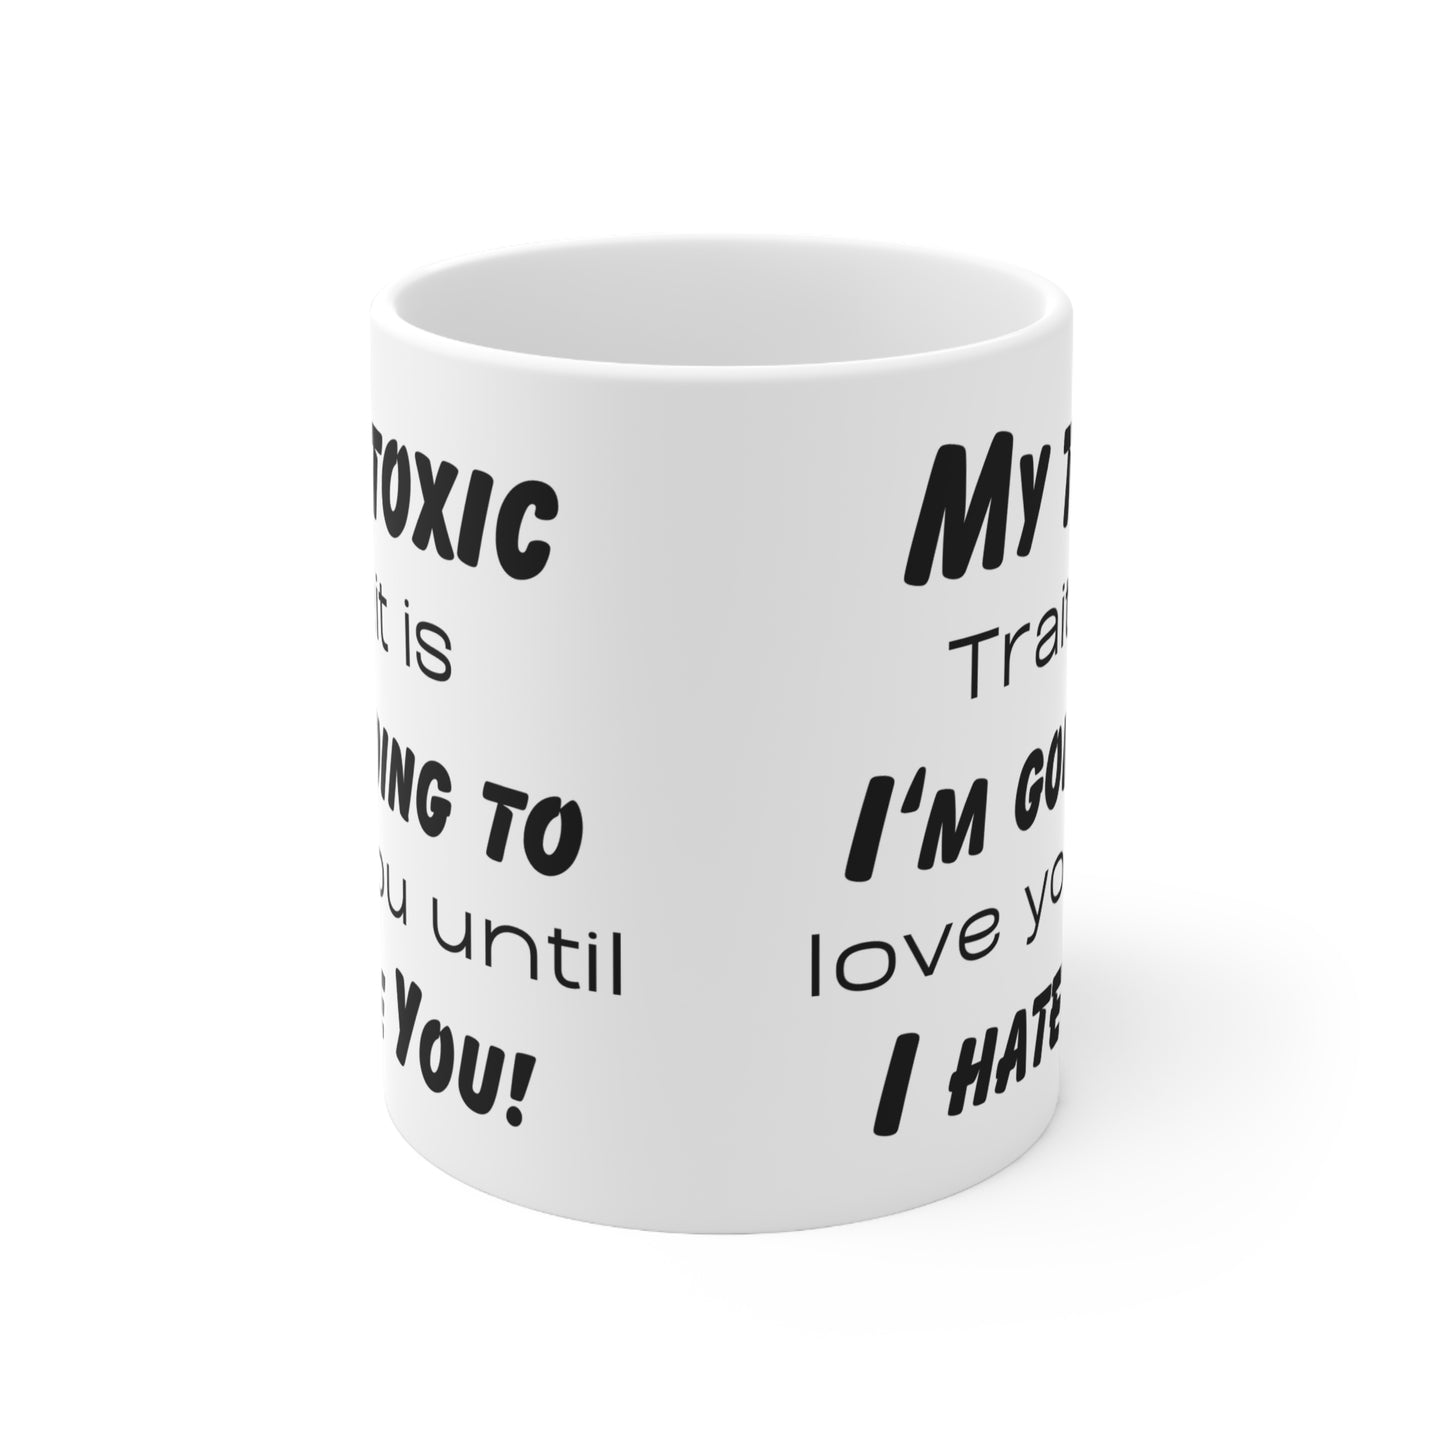 My toxic trait is, I'm going to love you, until I hate you! Ceramic Coffee Cups, 11oz, 15oz